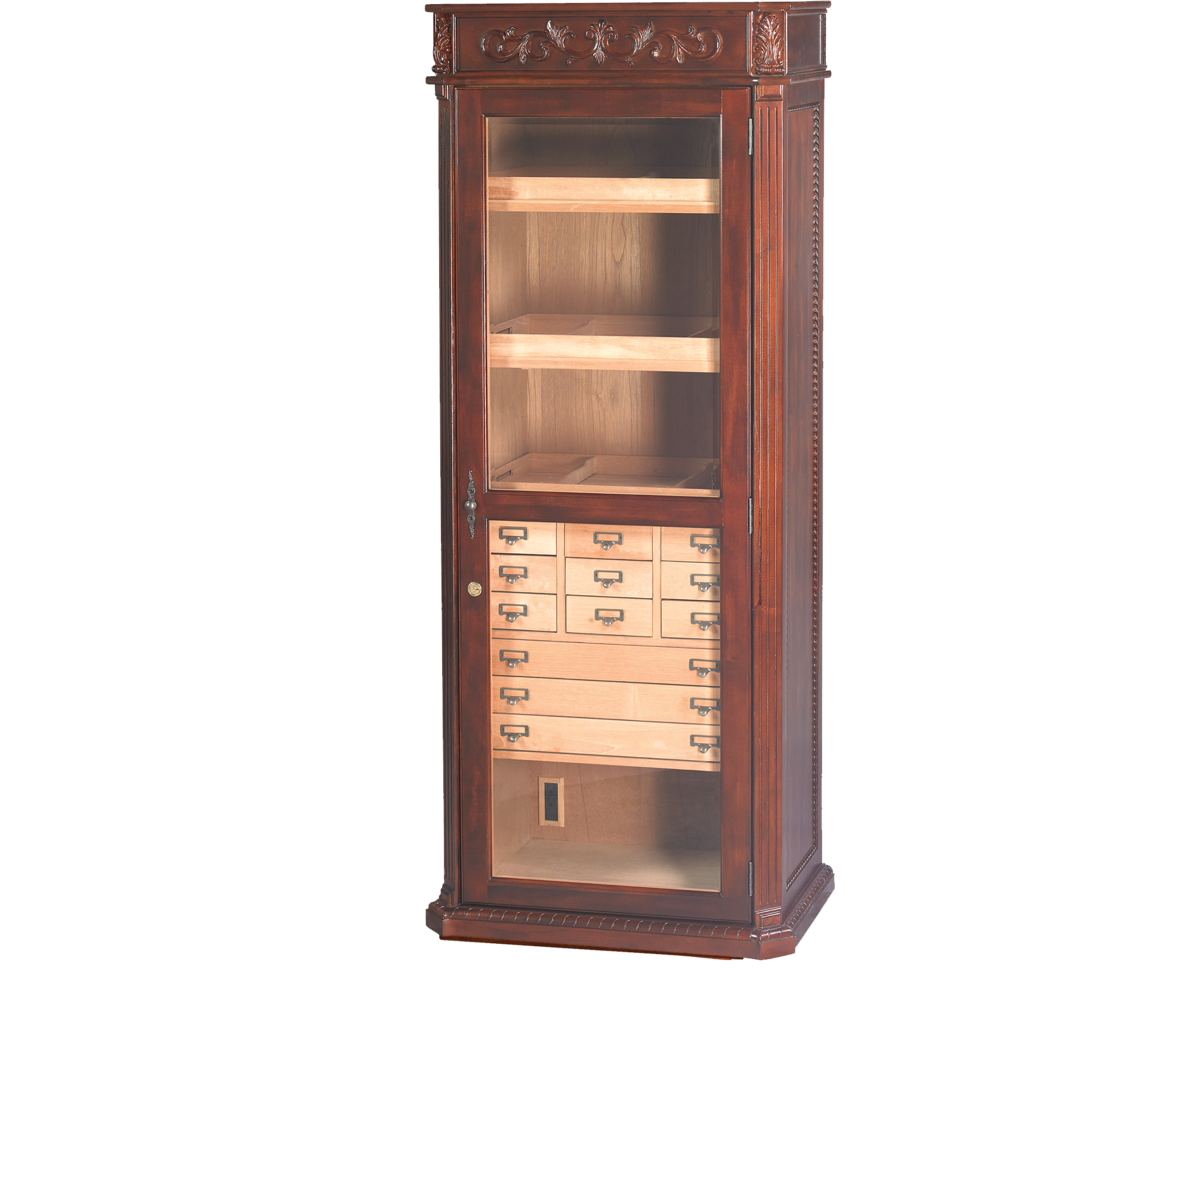 Olde English Cigar Humidor Tower Cabinet | Holds 3500 Cigars